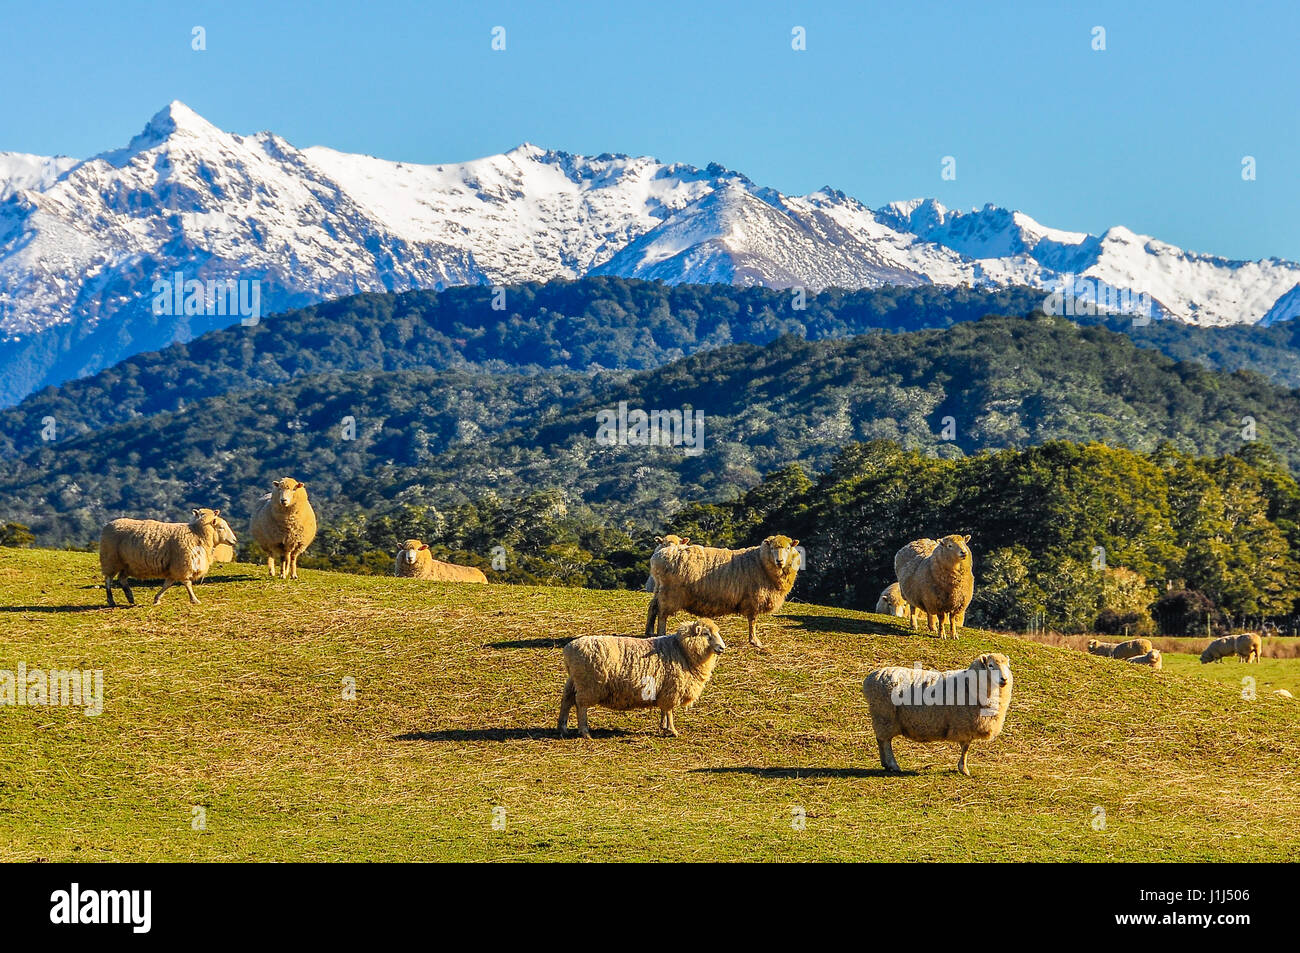 Sheep in a green meadow and snowy mountains in the background in the Southern Scenic Route, New Zealand Stock Photo